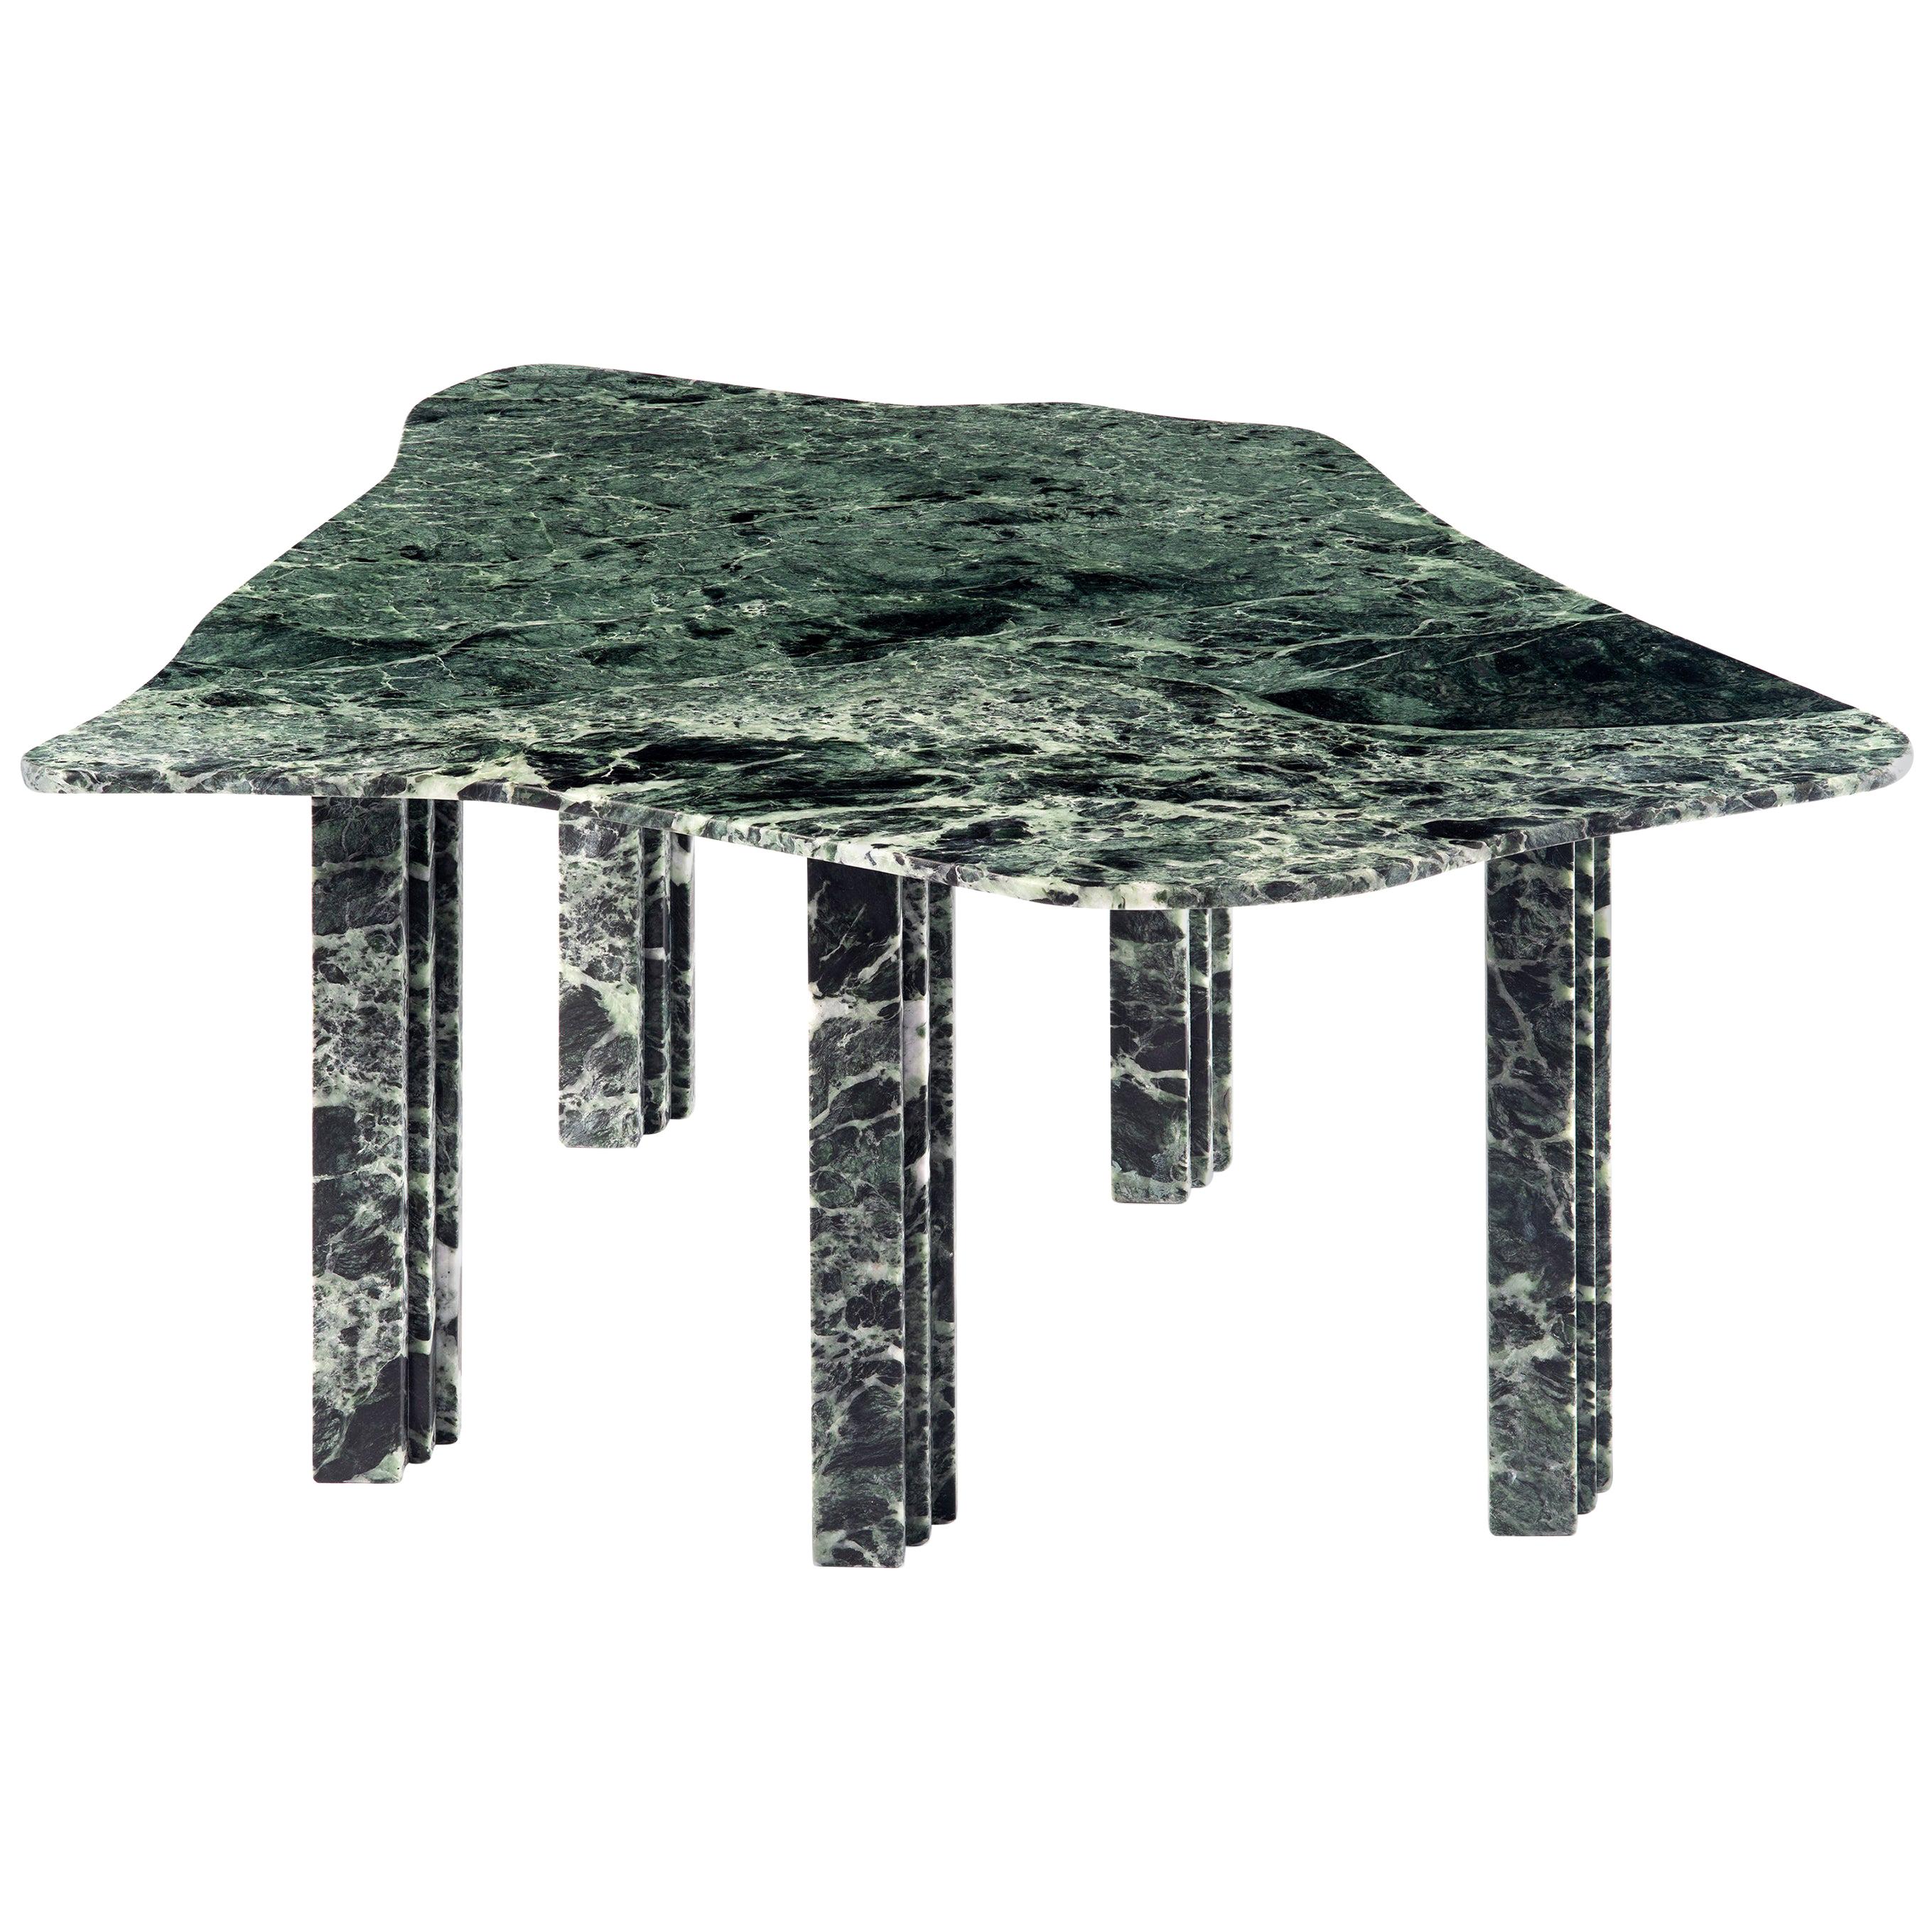 Sculptural green marble coffee table - Lorenzo Bini
Title: No-thin
Measures: 90 x 75 x H 37 cm
Material: Verde Alpi

Six Tableaux is a series of marble tables designed by Lorenzo Bini and built by Atzara Marmi with the support of Margraf.
Each